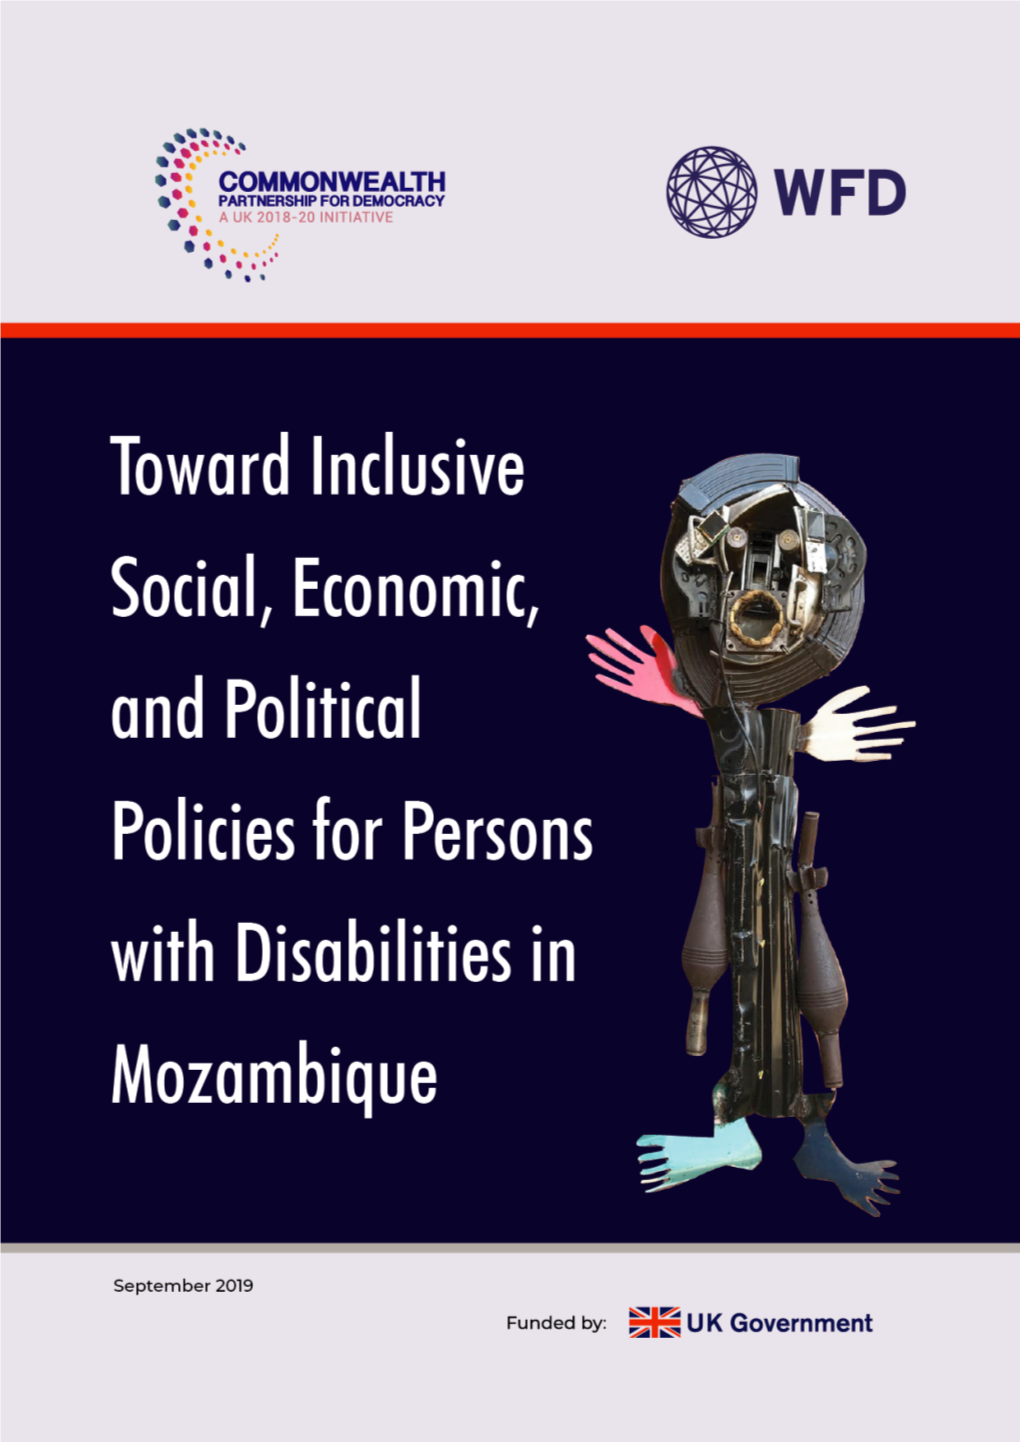 Toward Inclusive Social, Economic, and Political Policies for Persons with Disabilities in Mozambique